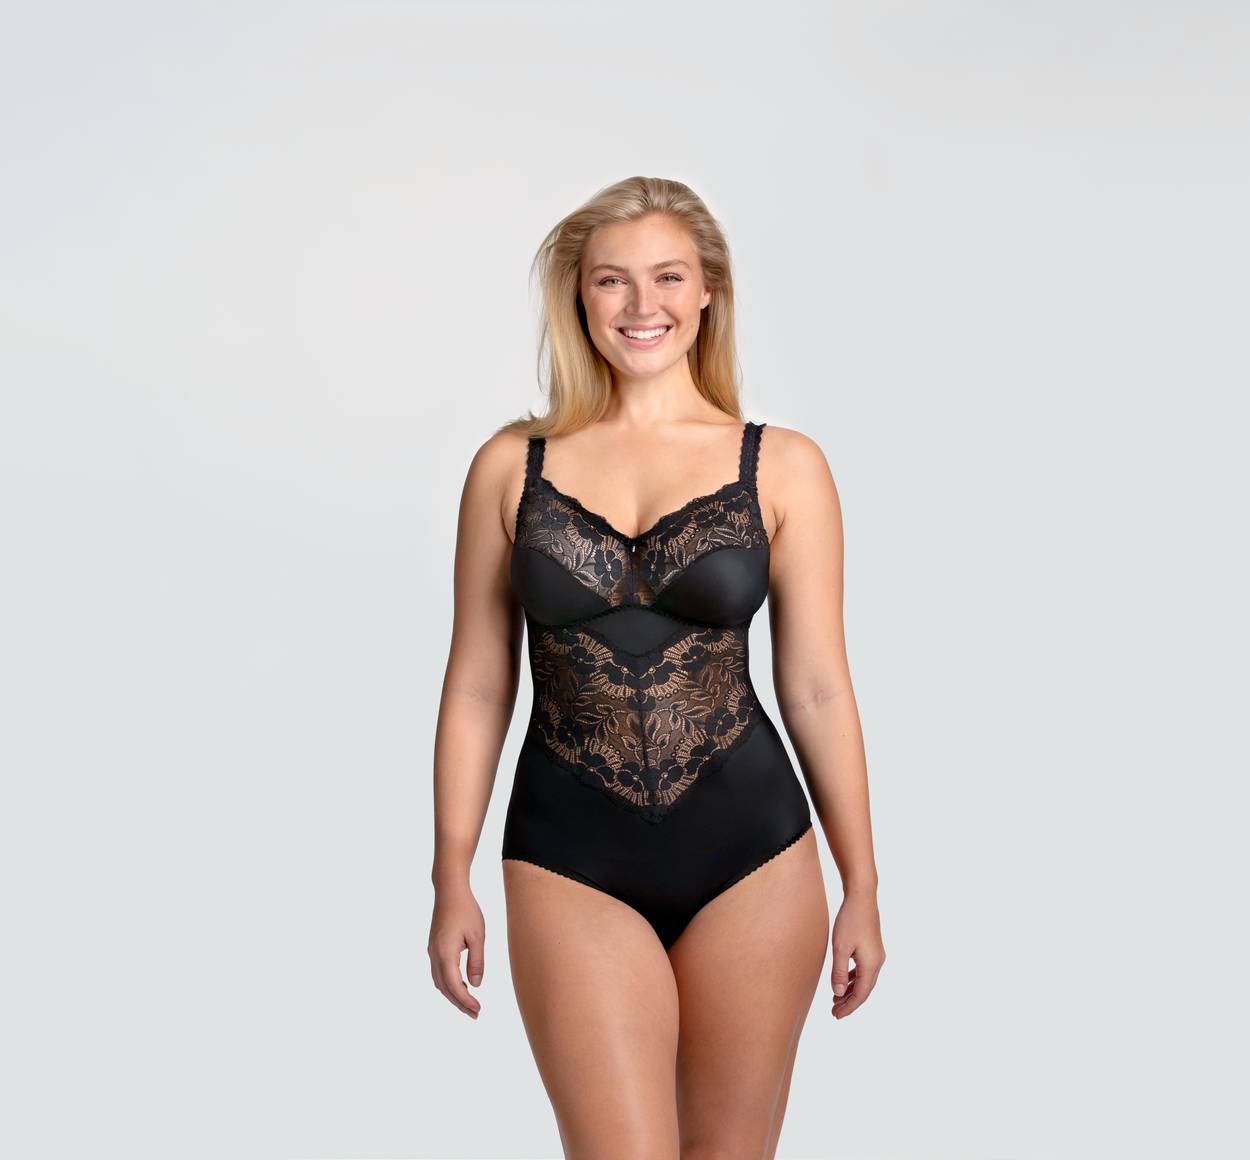 13 reasons to love a bodysuit